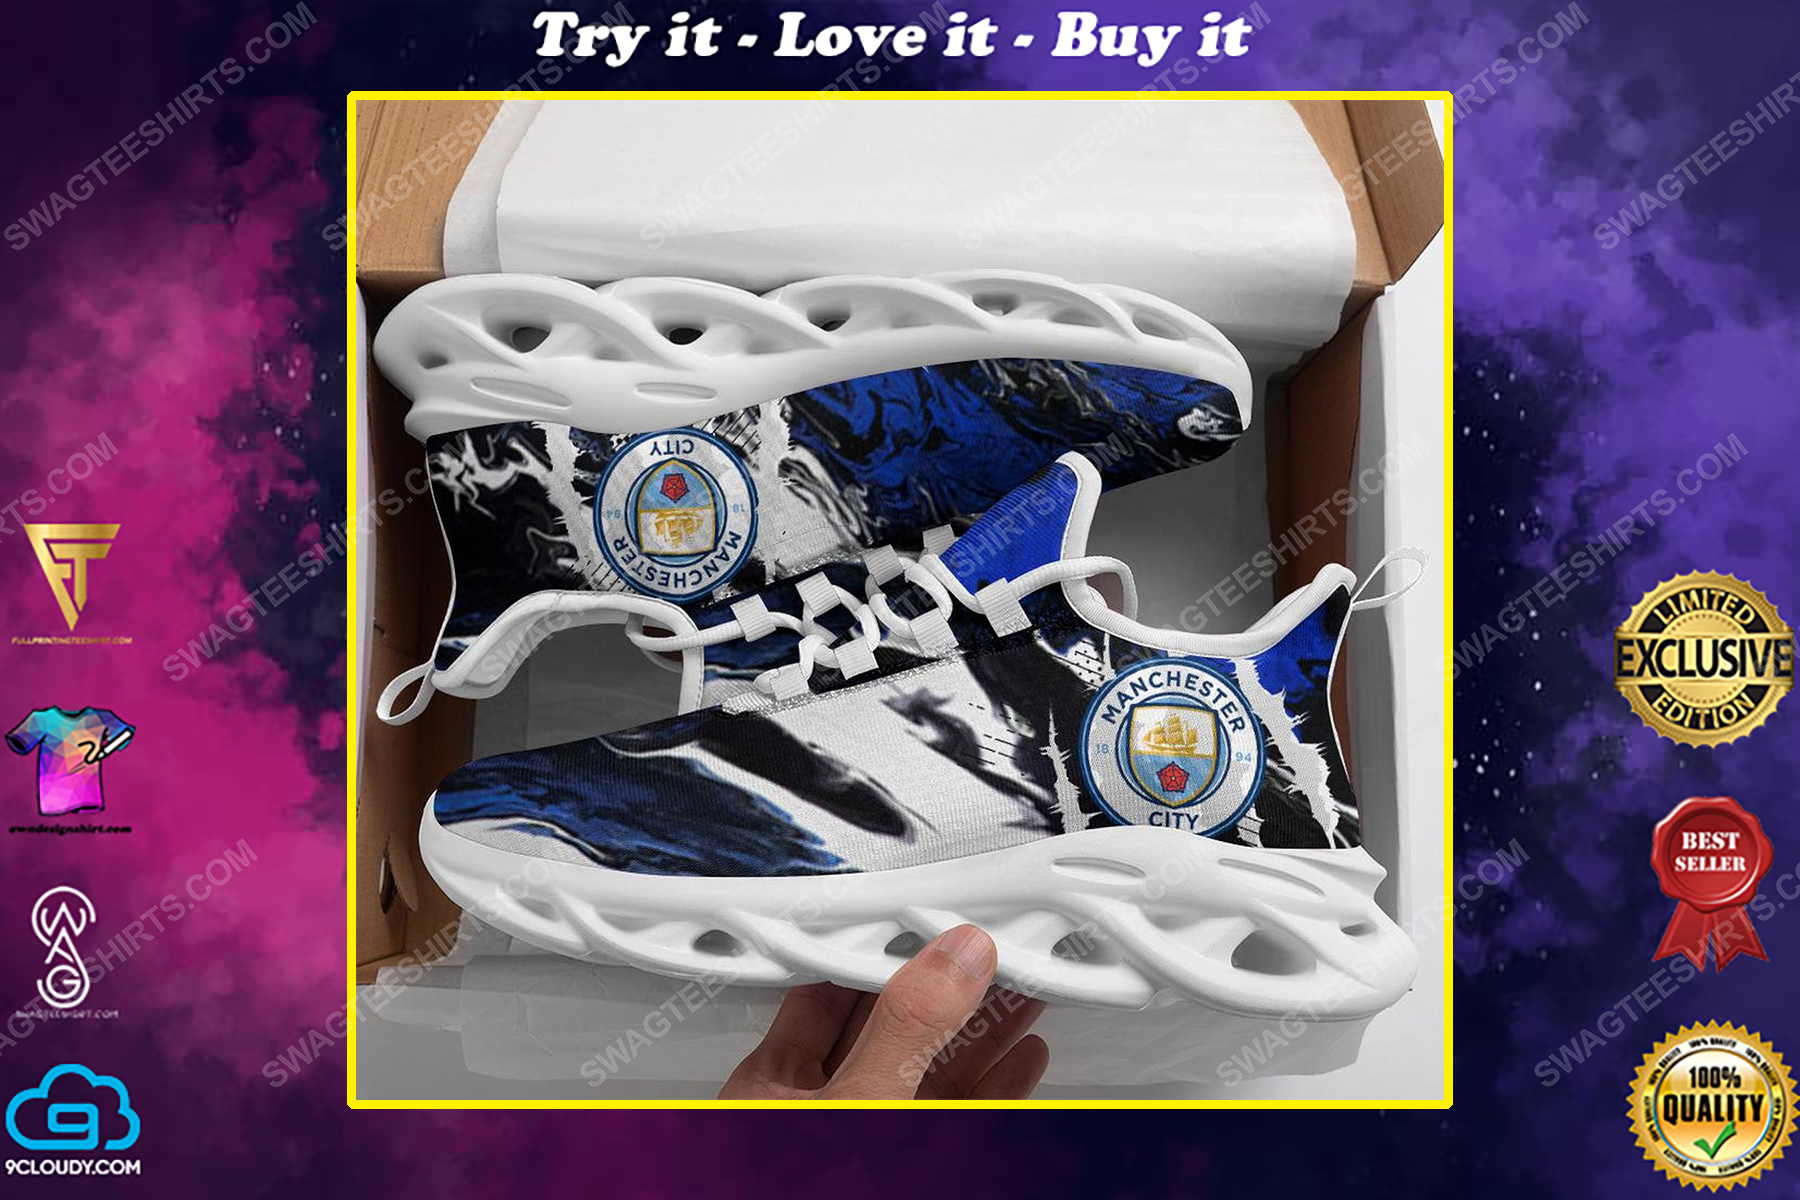 The manchester city football club max soul shoes